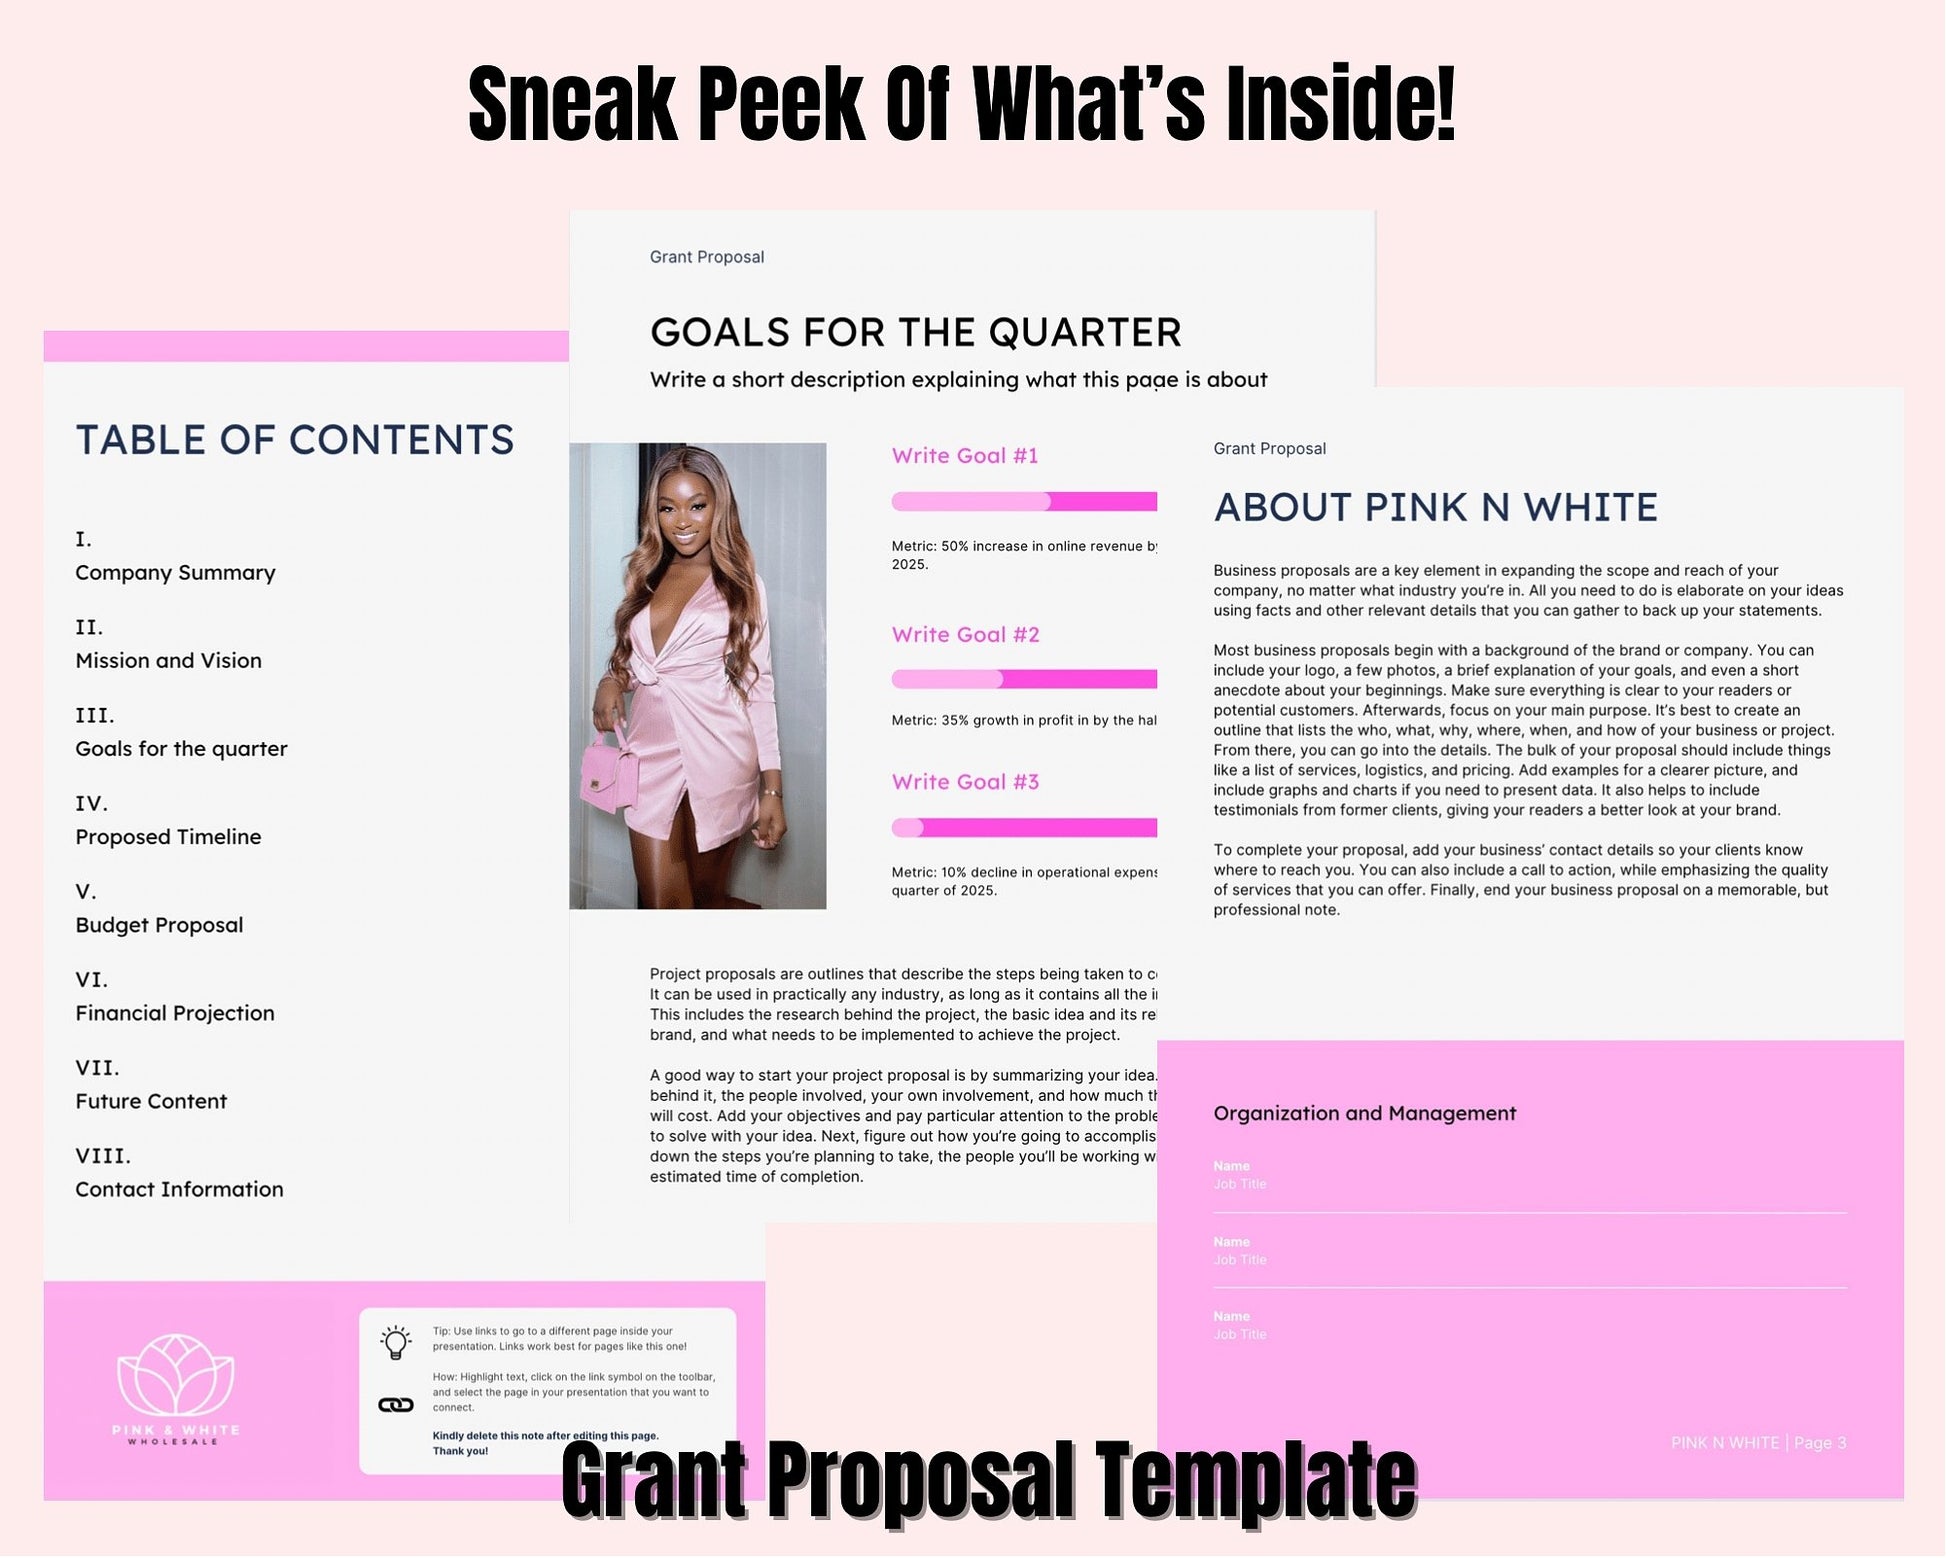 50 Business Grants + Grant Proposal Template - Pink N White Factory